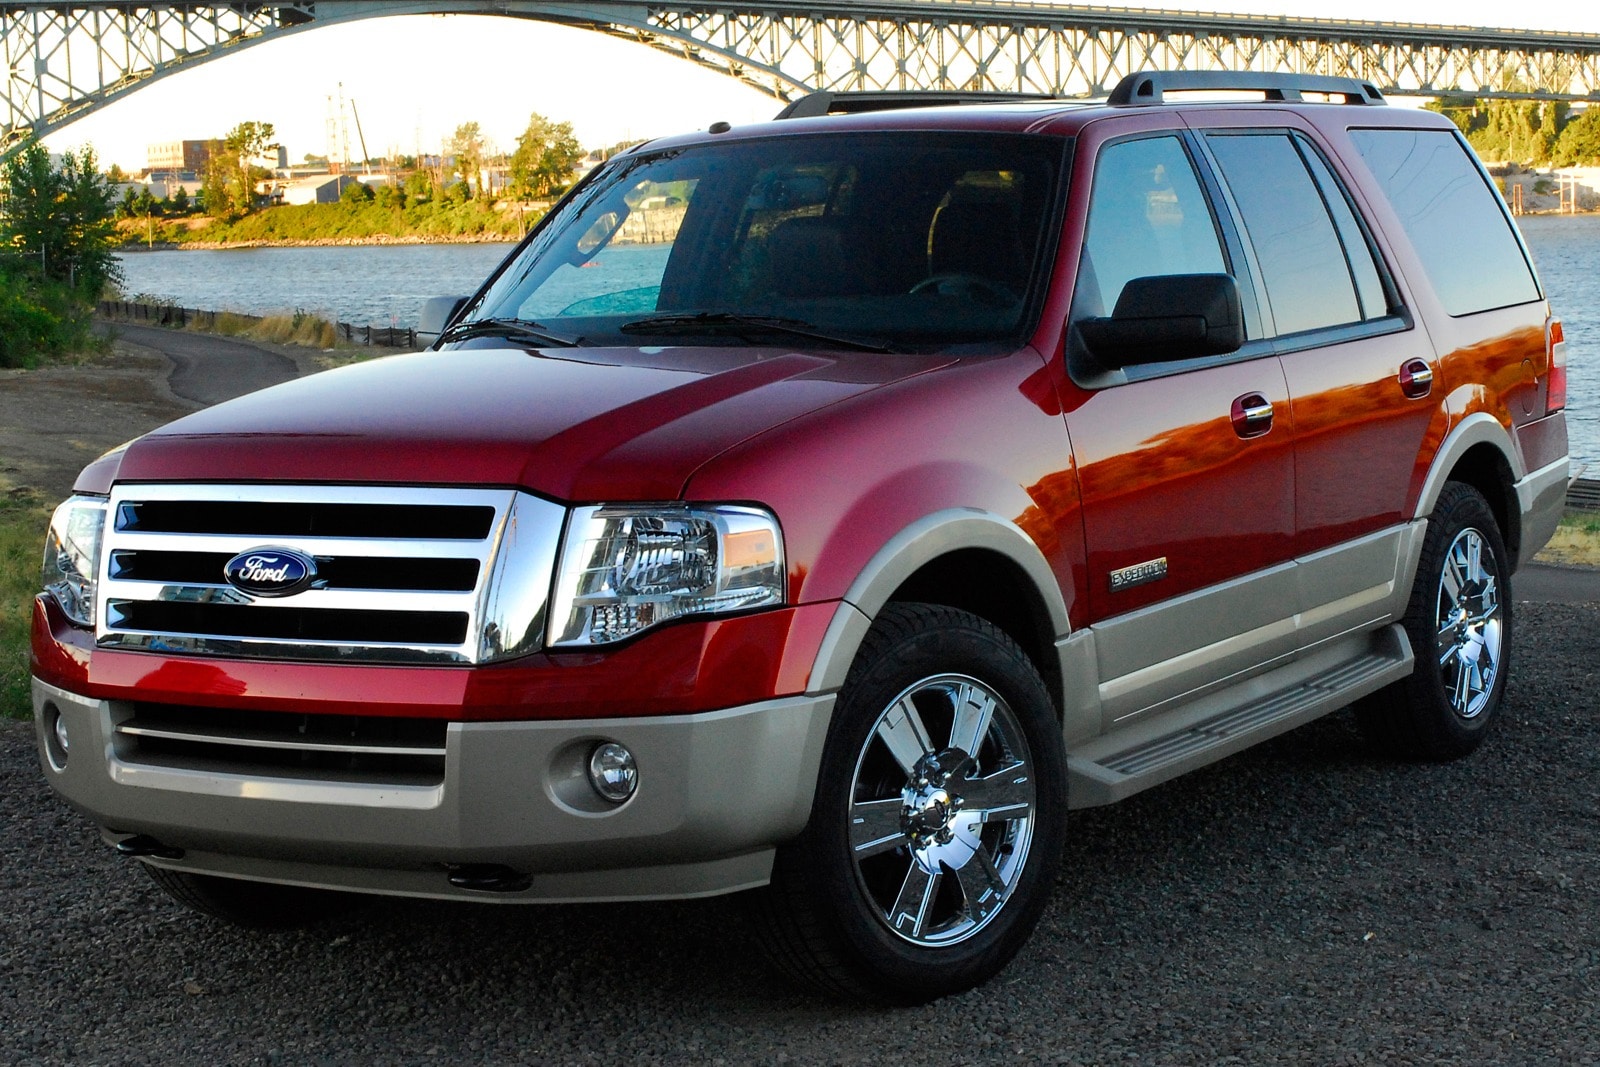 2008 Ford Expedition Review & Ratings | Edmunds